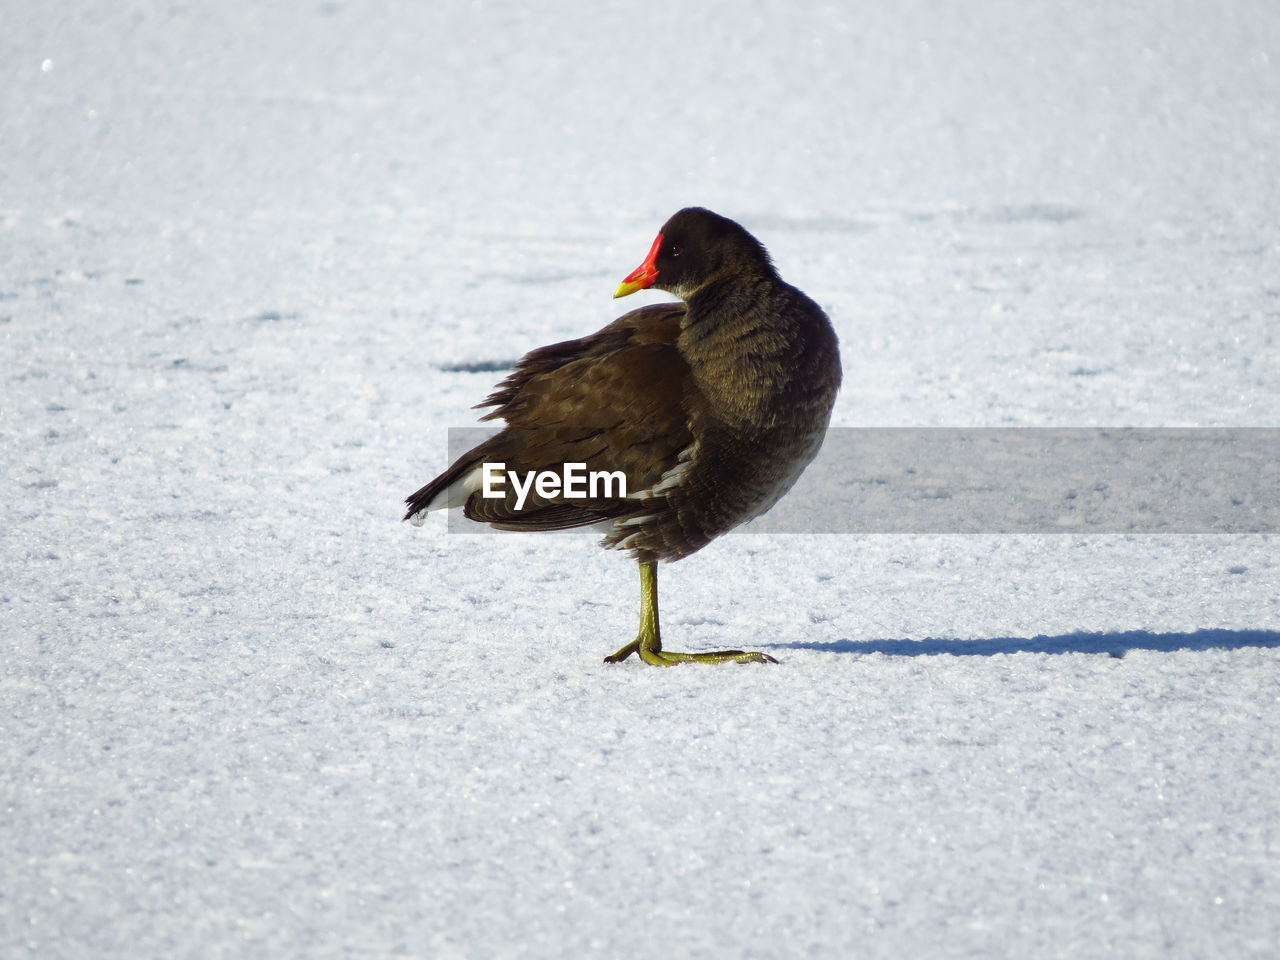 Moorhen on snow covered land